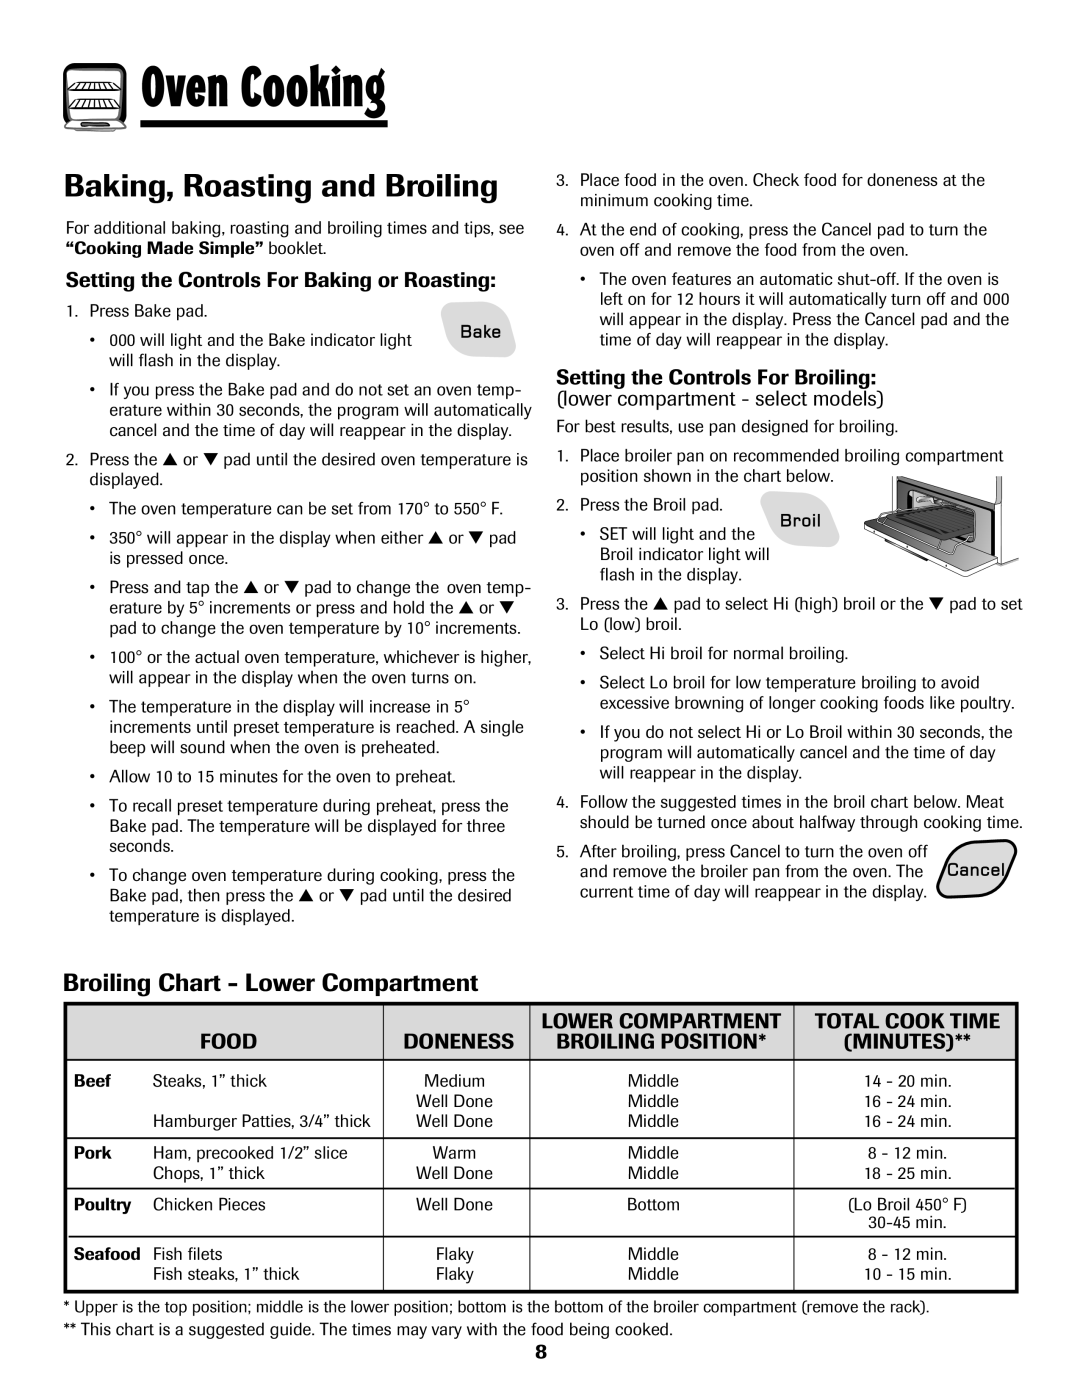 Amana 8113P515-60 manual Baking, Roasting and Broiling, Broiling Chart - Lower Compartment, Total Cook Time, Food, Doneness 